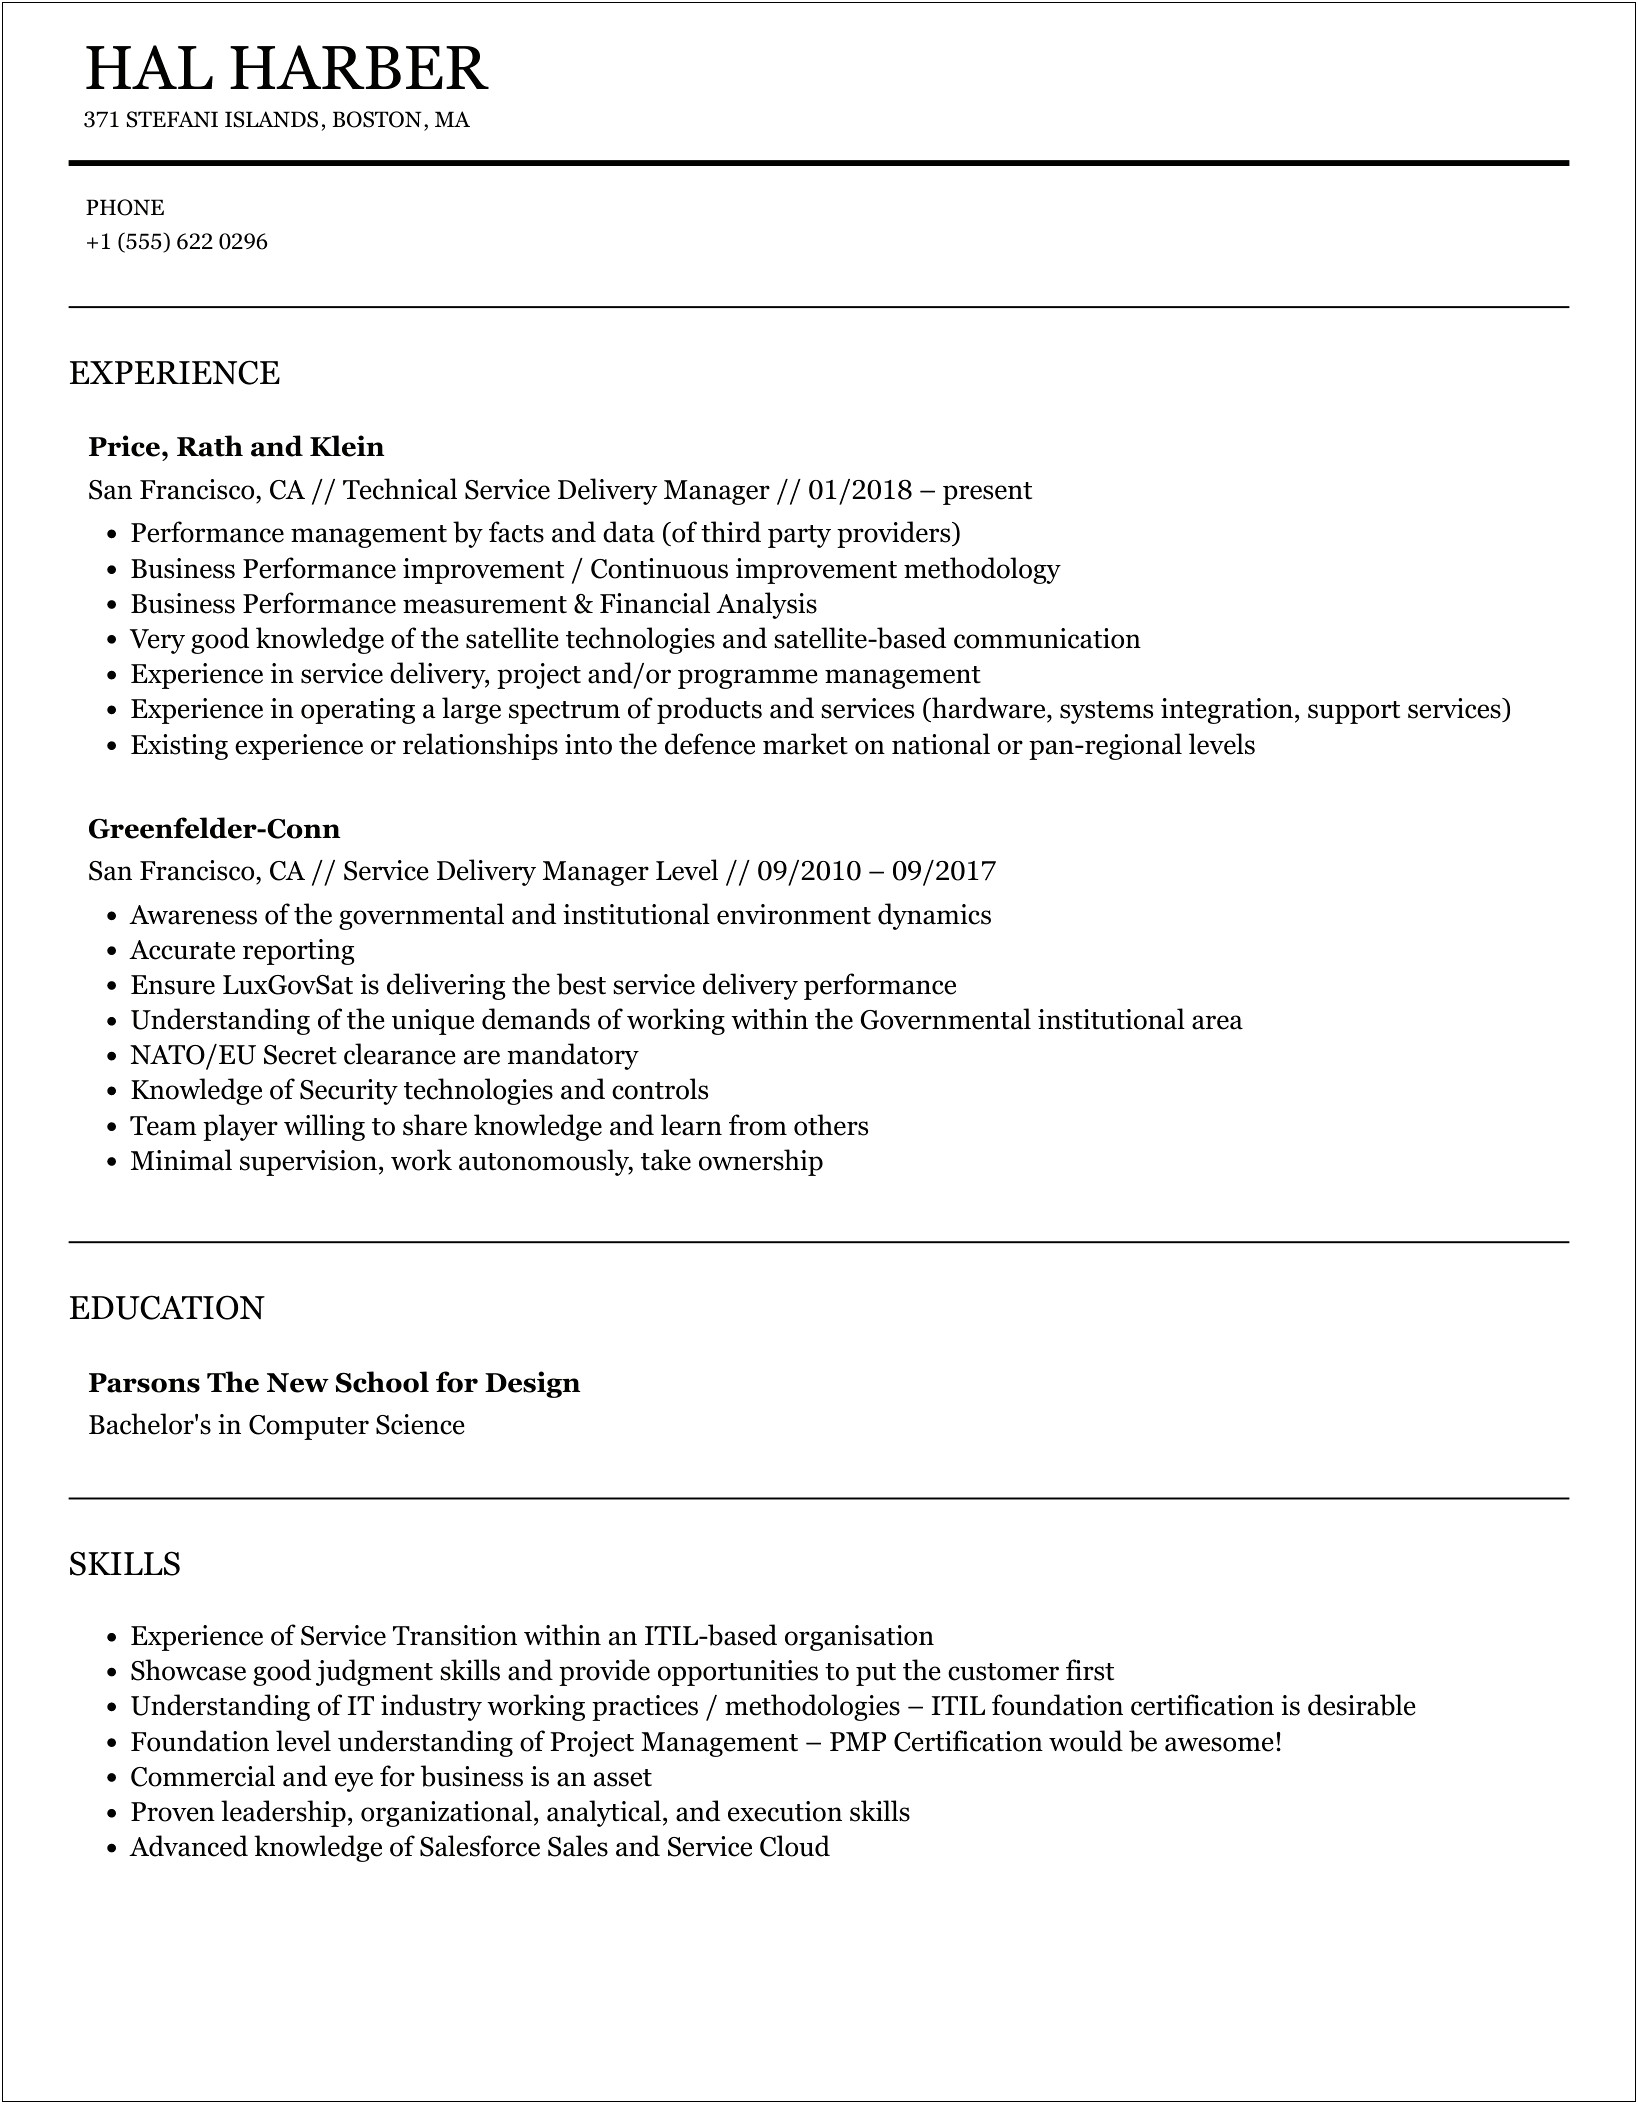 Information Technology Service Delivery Manager Resume